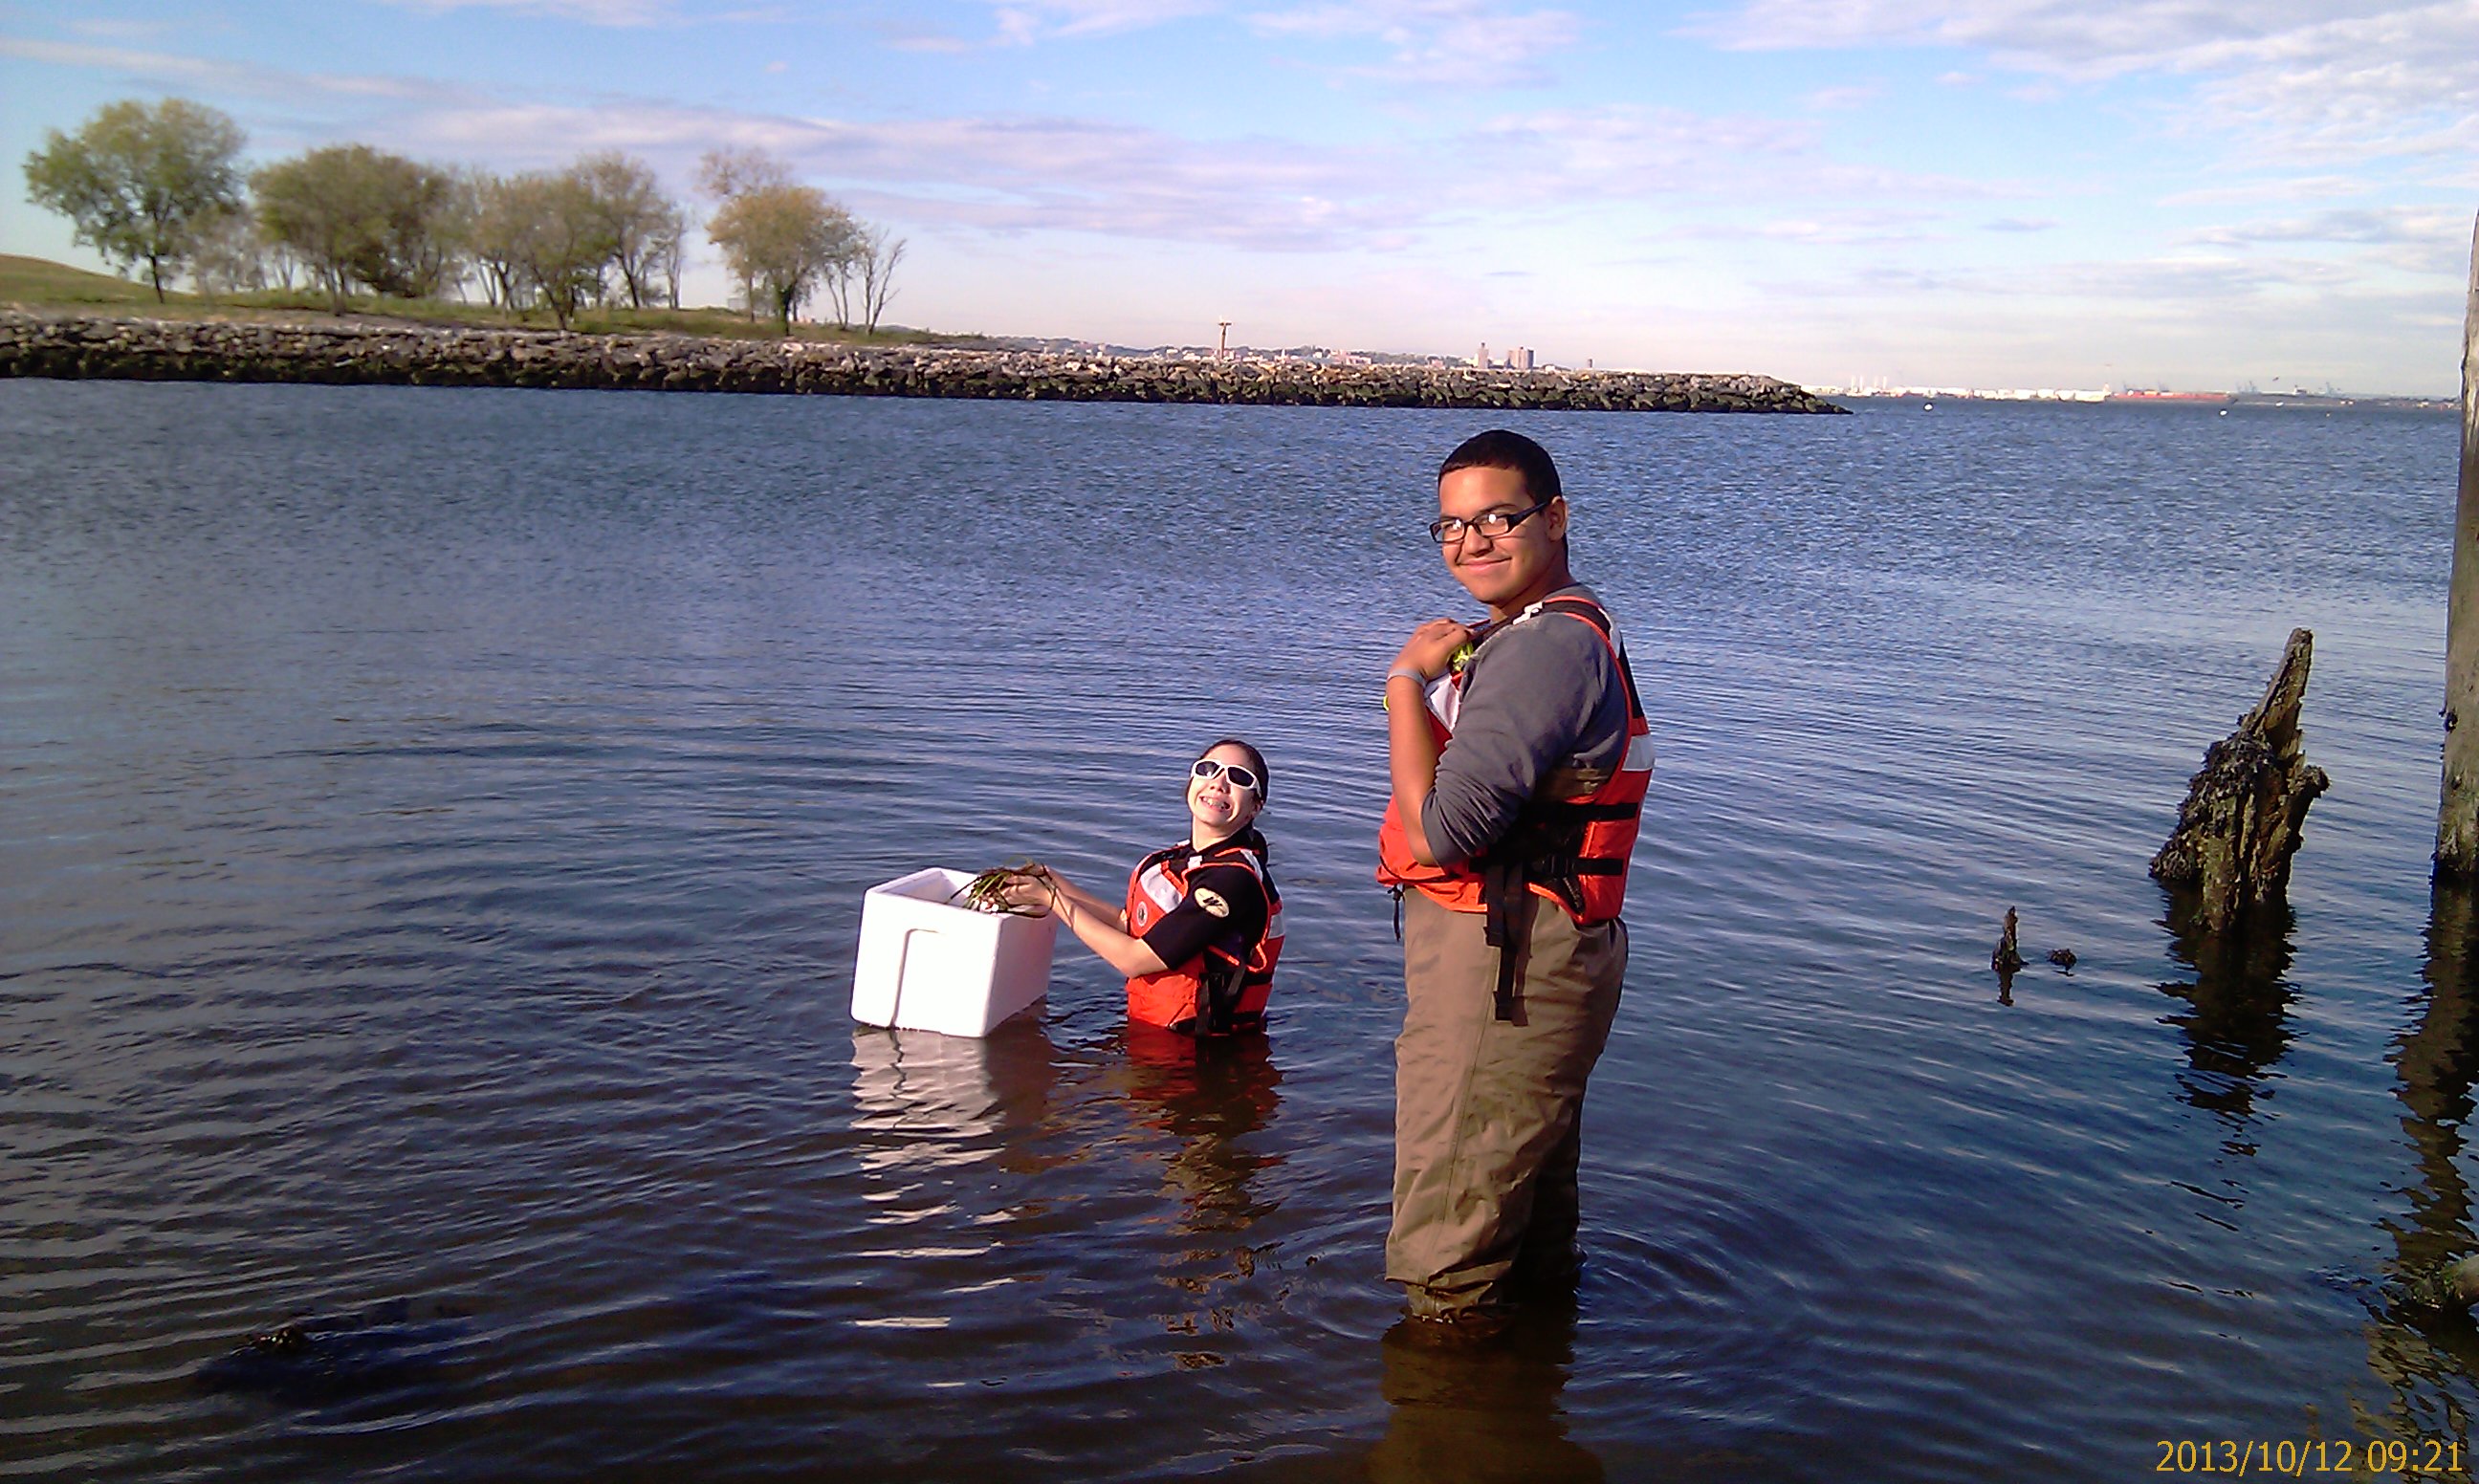 On October 12 we set off to restore eel grass at Brooklyn Pier’s Park.